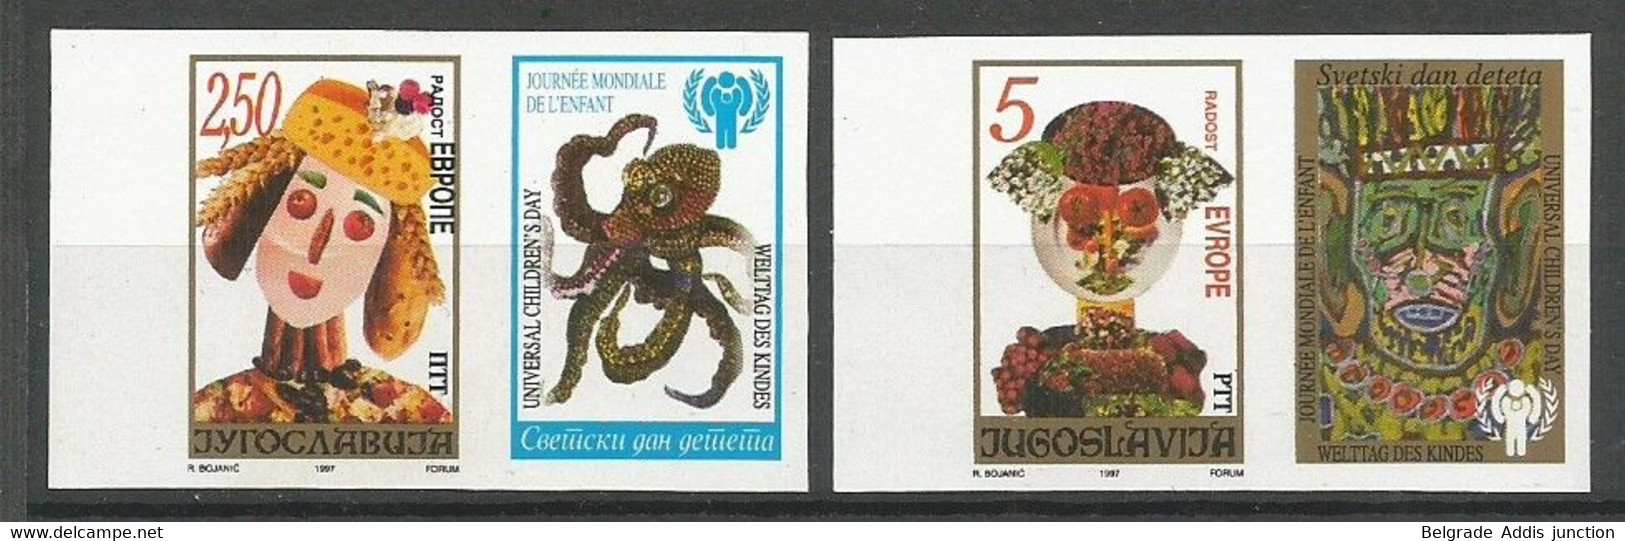 Yugoslavia ERROR Mi.2834/35 Complete Set IMPERFORATED With LABELS ** / MNH 1997 Europa Hang-on Issues Children Painting - Imperforates, Proofs & Errors